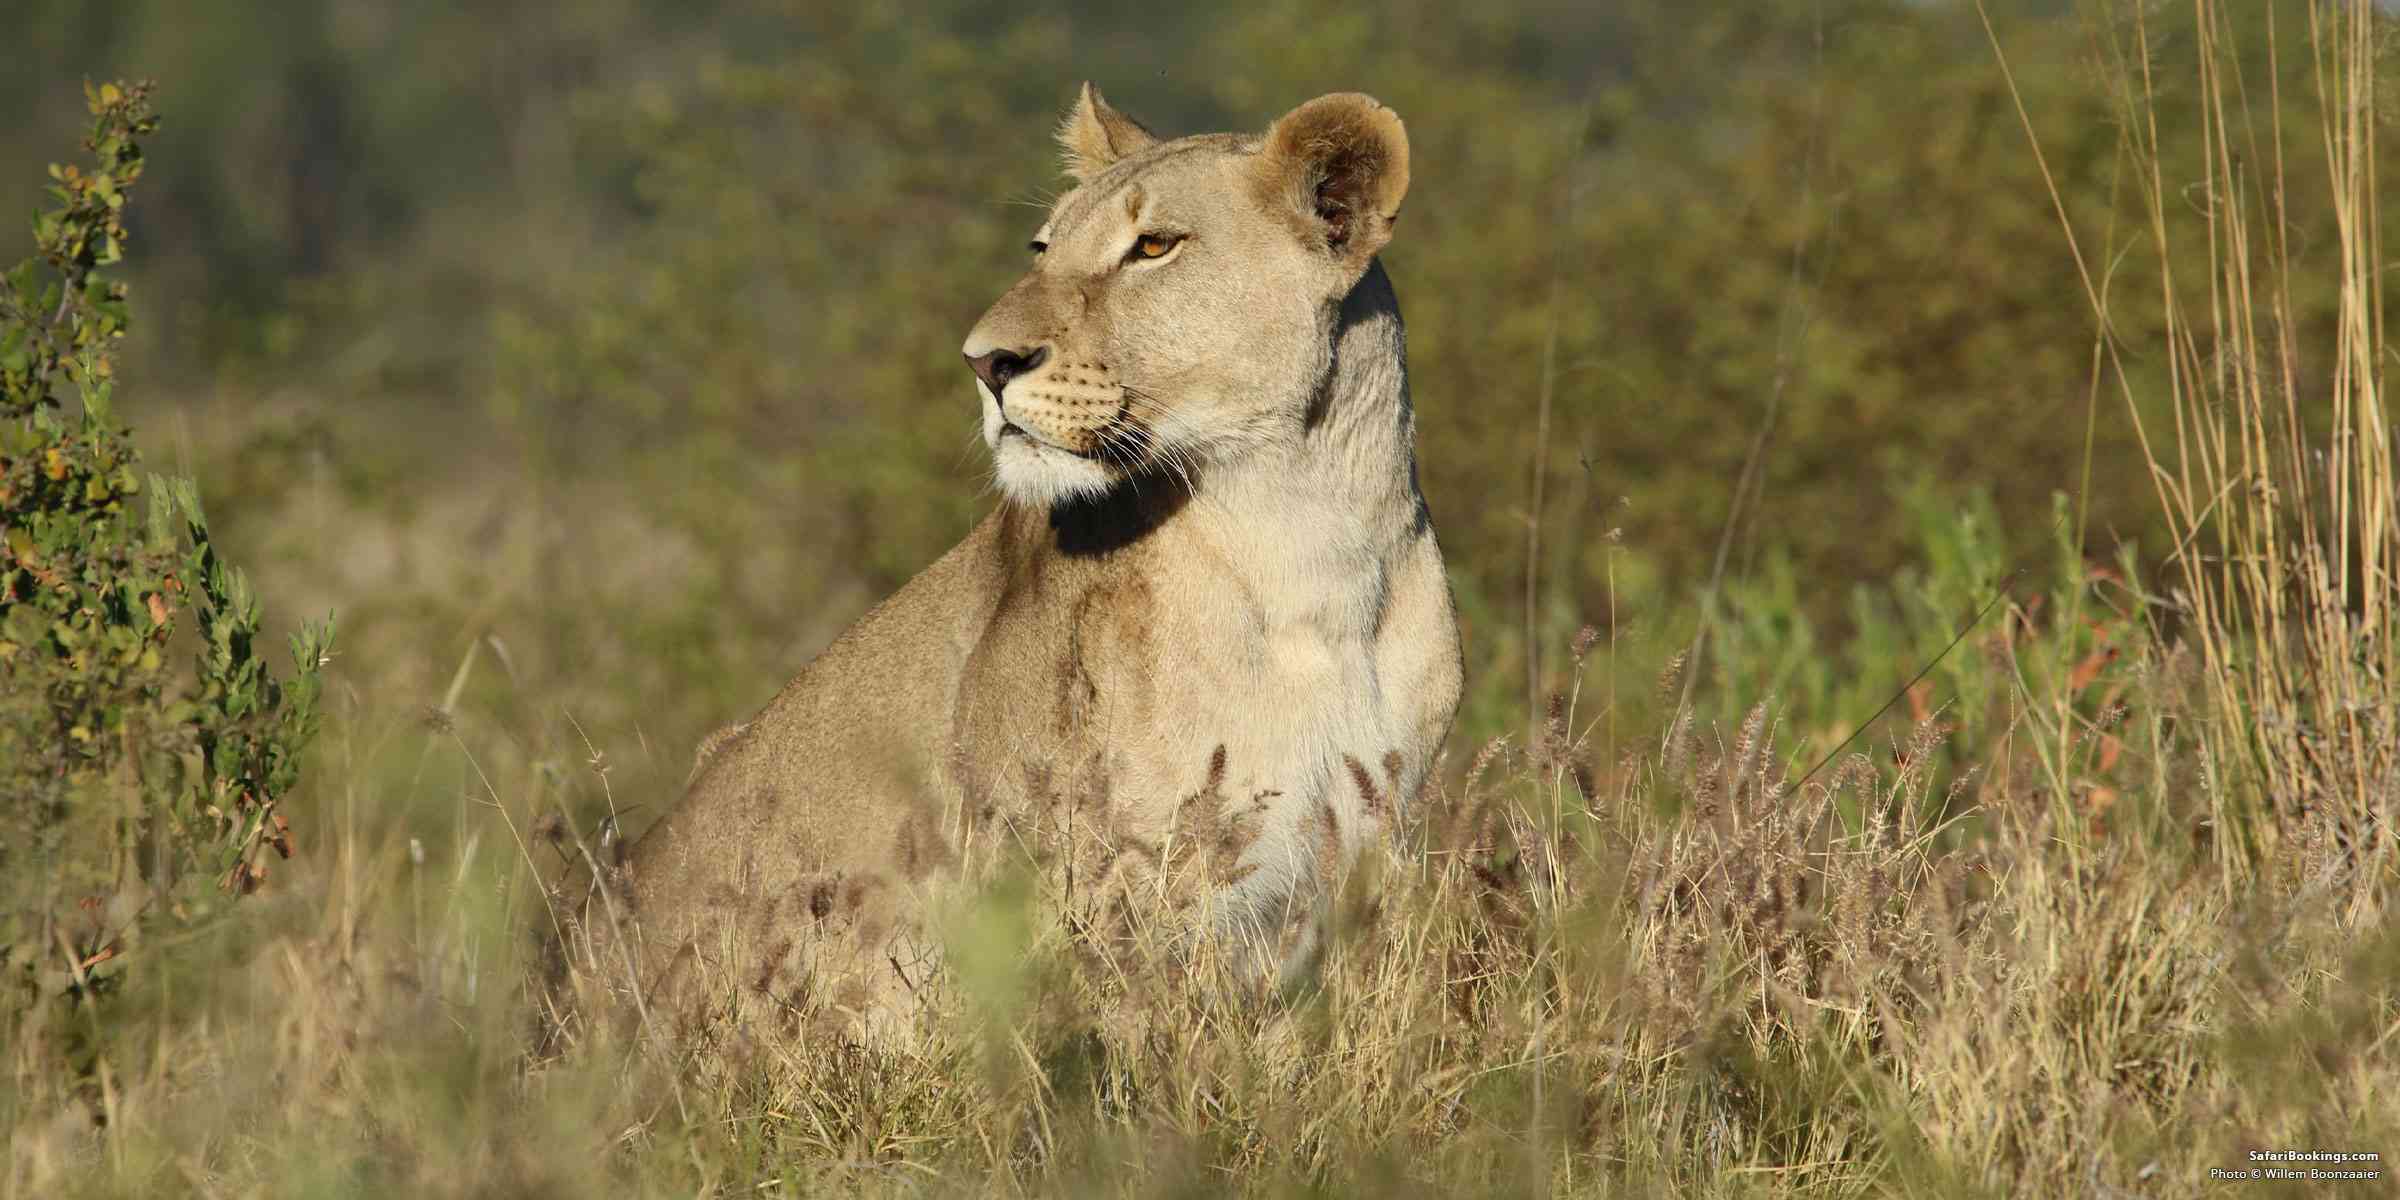 10 Things NOT to Expect on Safari